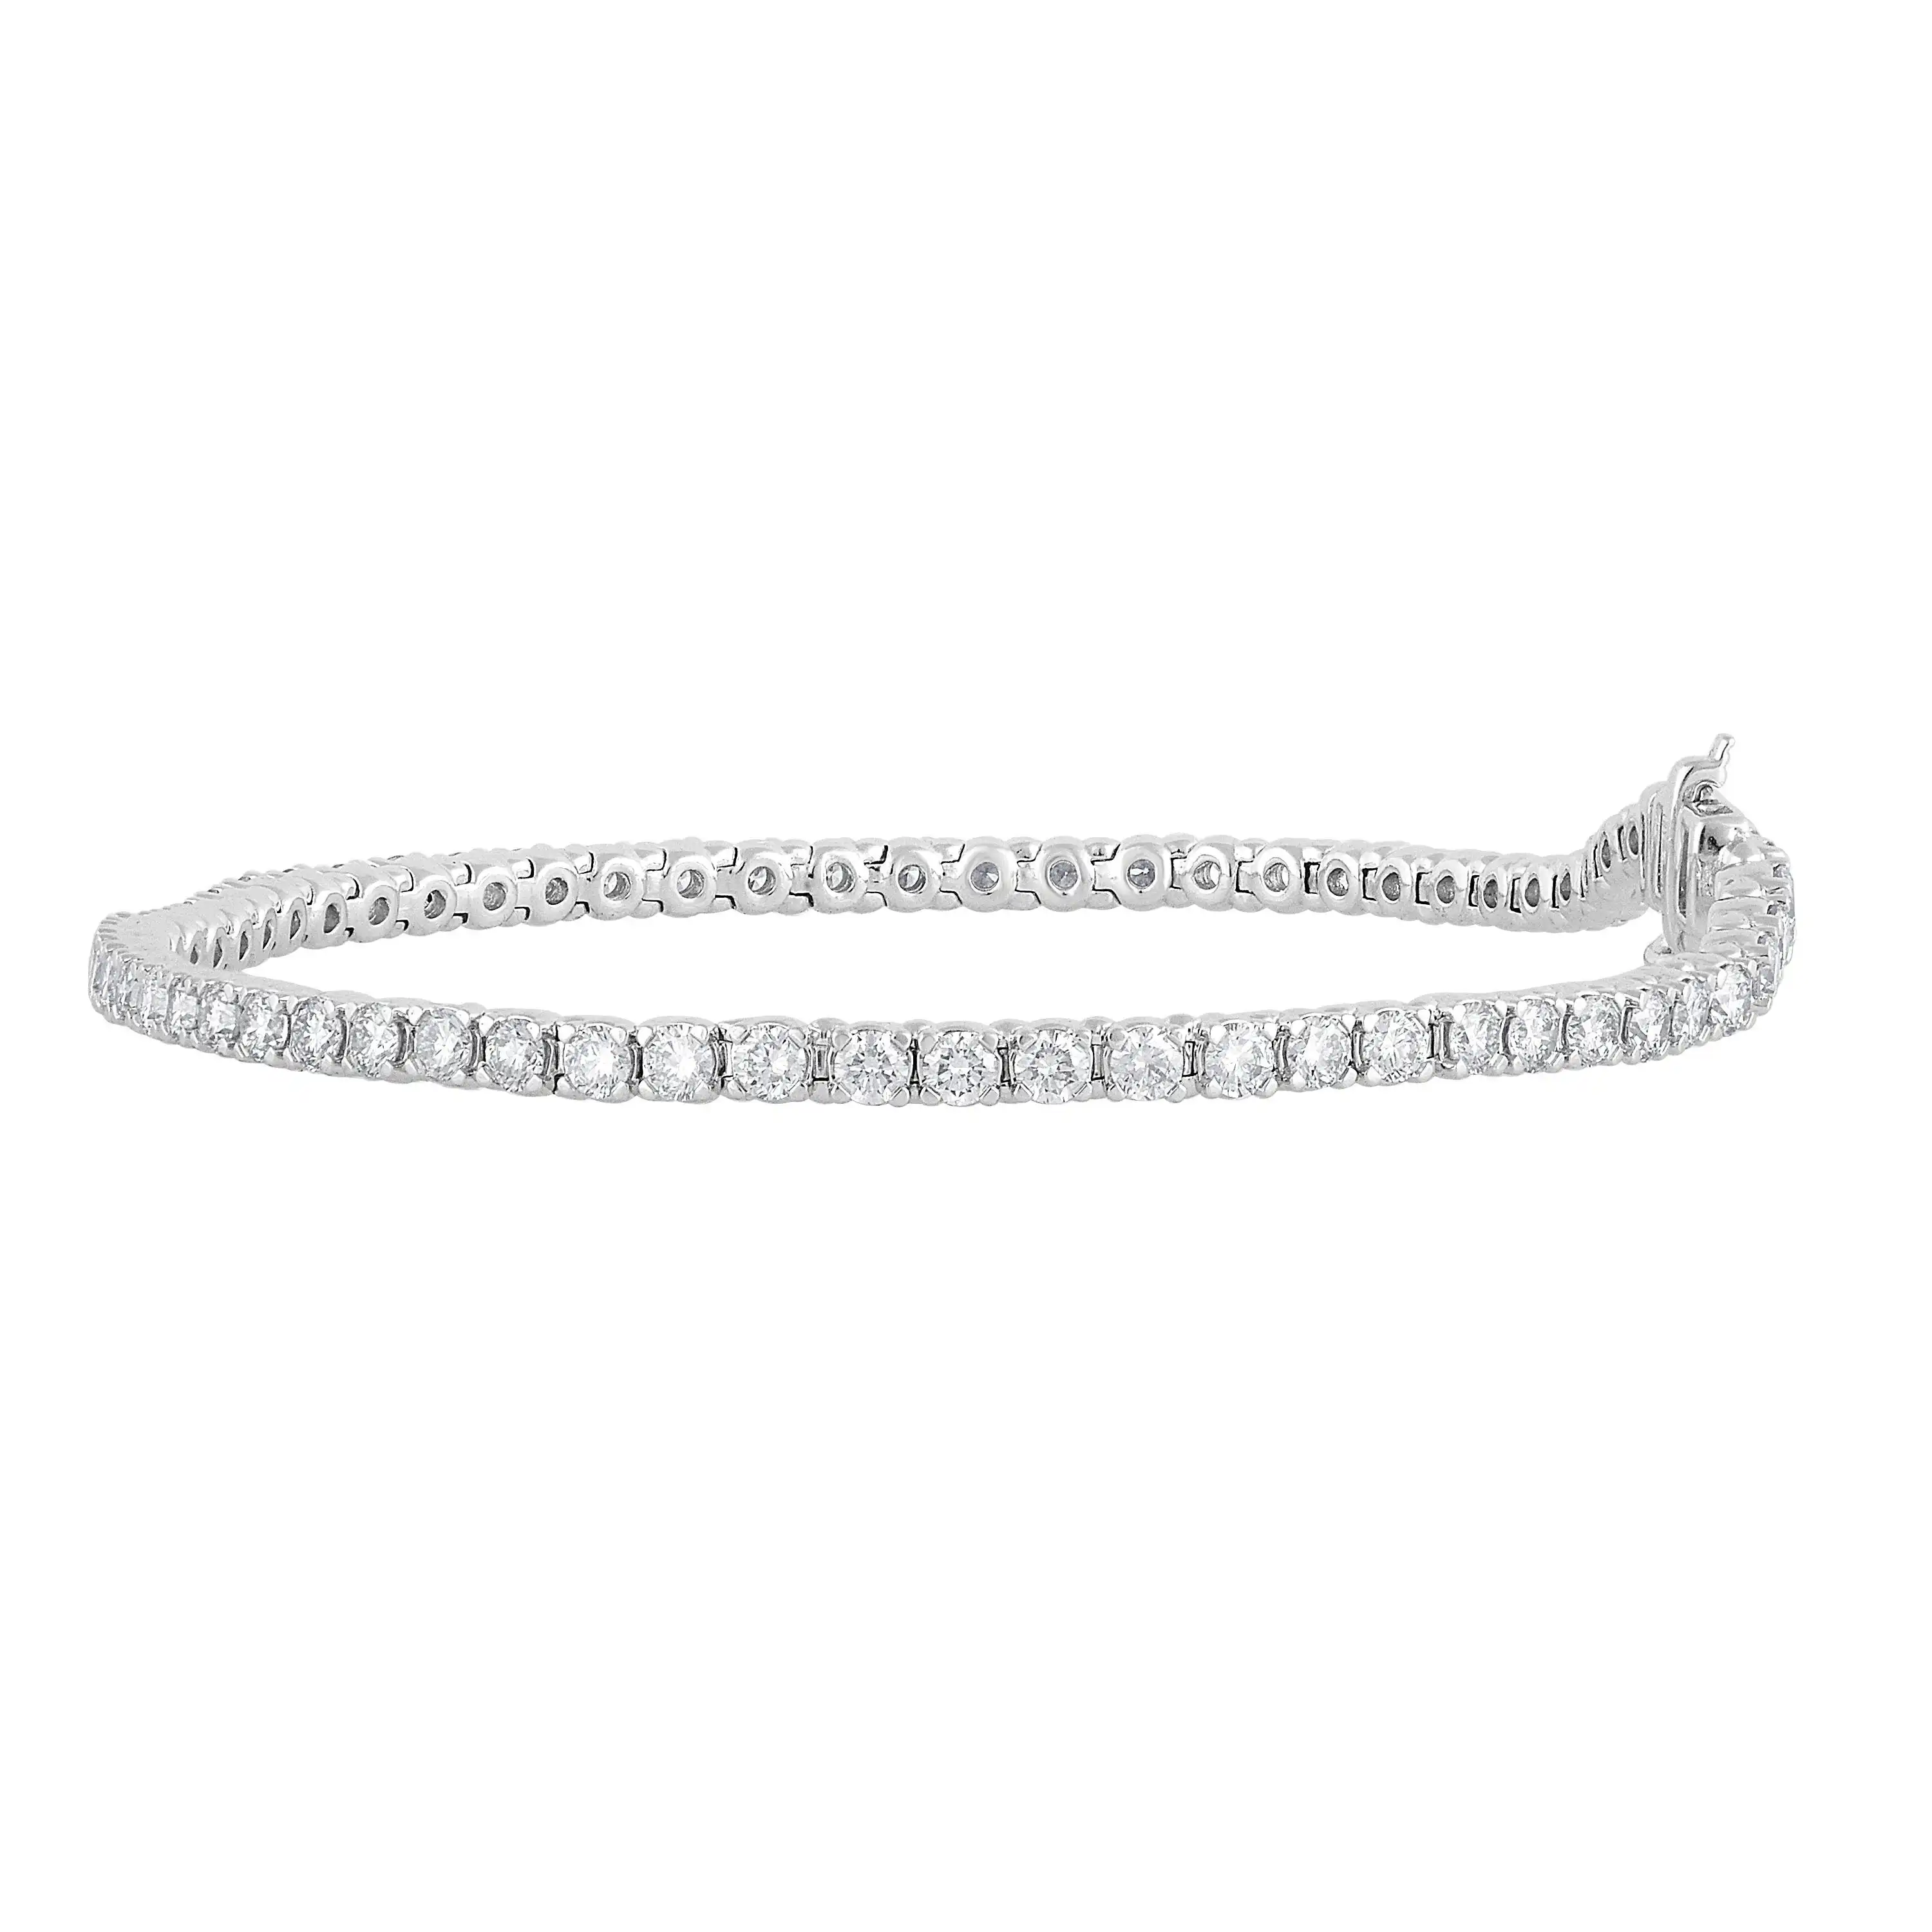 Mirage Tennis Bracelet with 3.00ct of Laboratory Grown Diamonds in Sterling Silver and Platinum